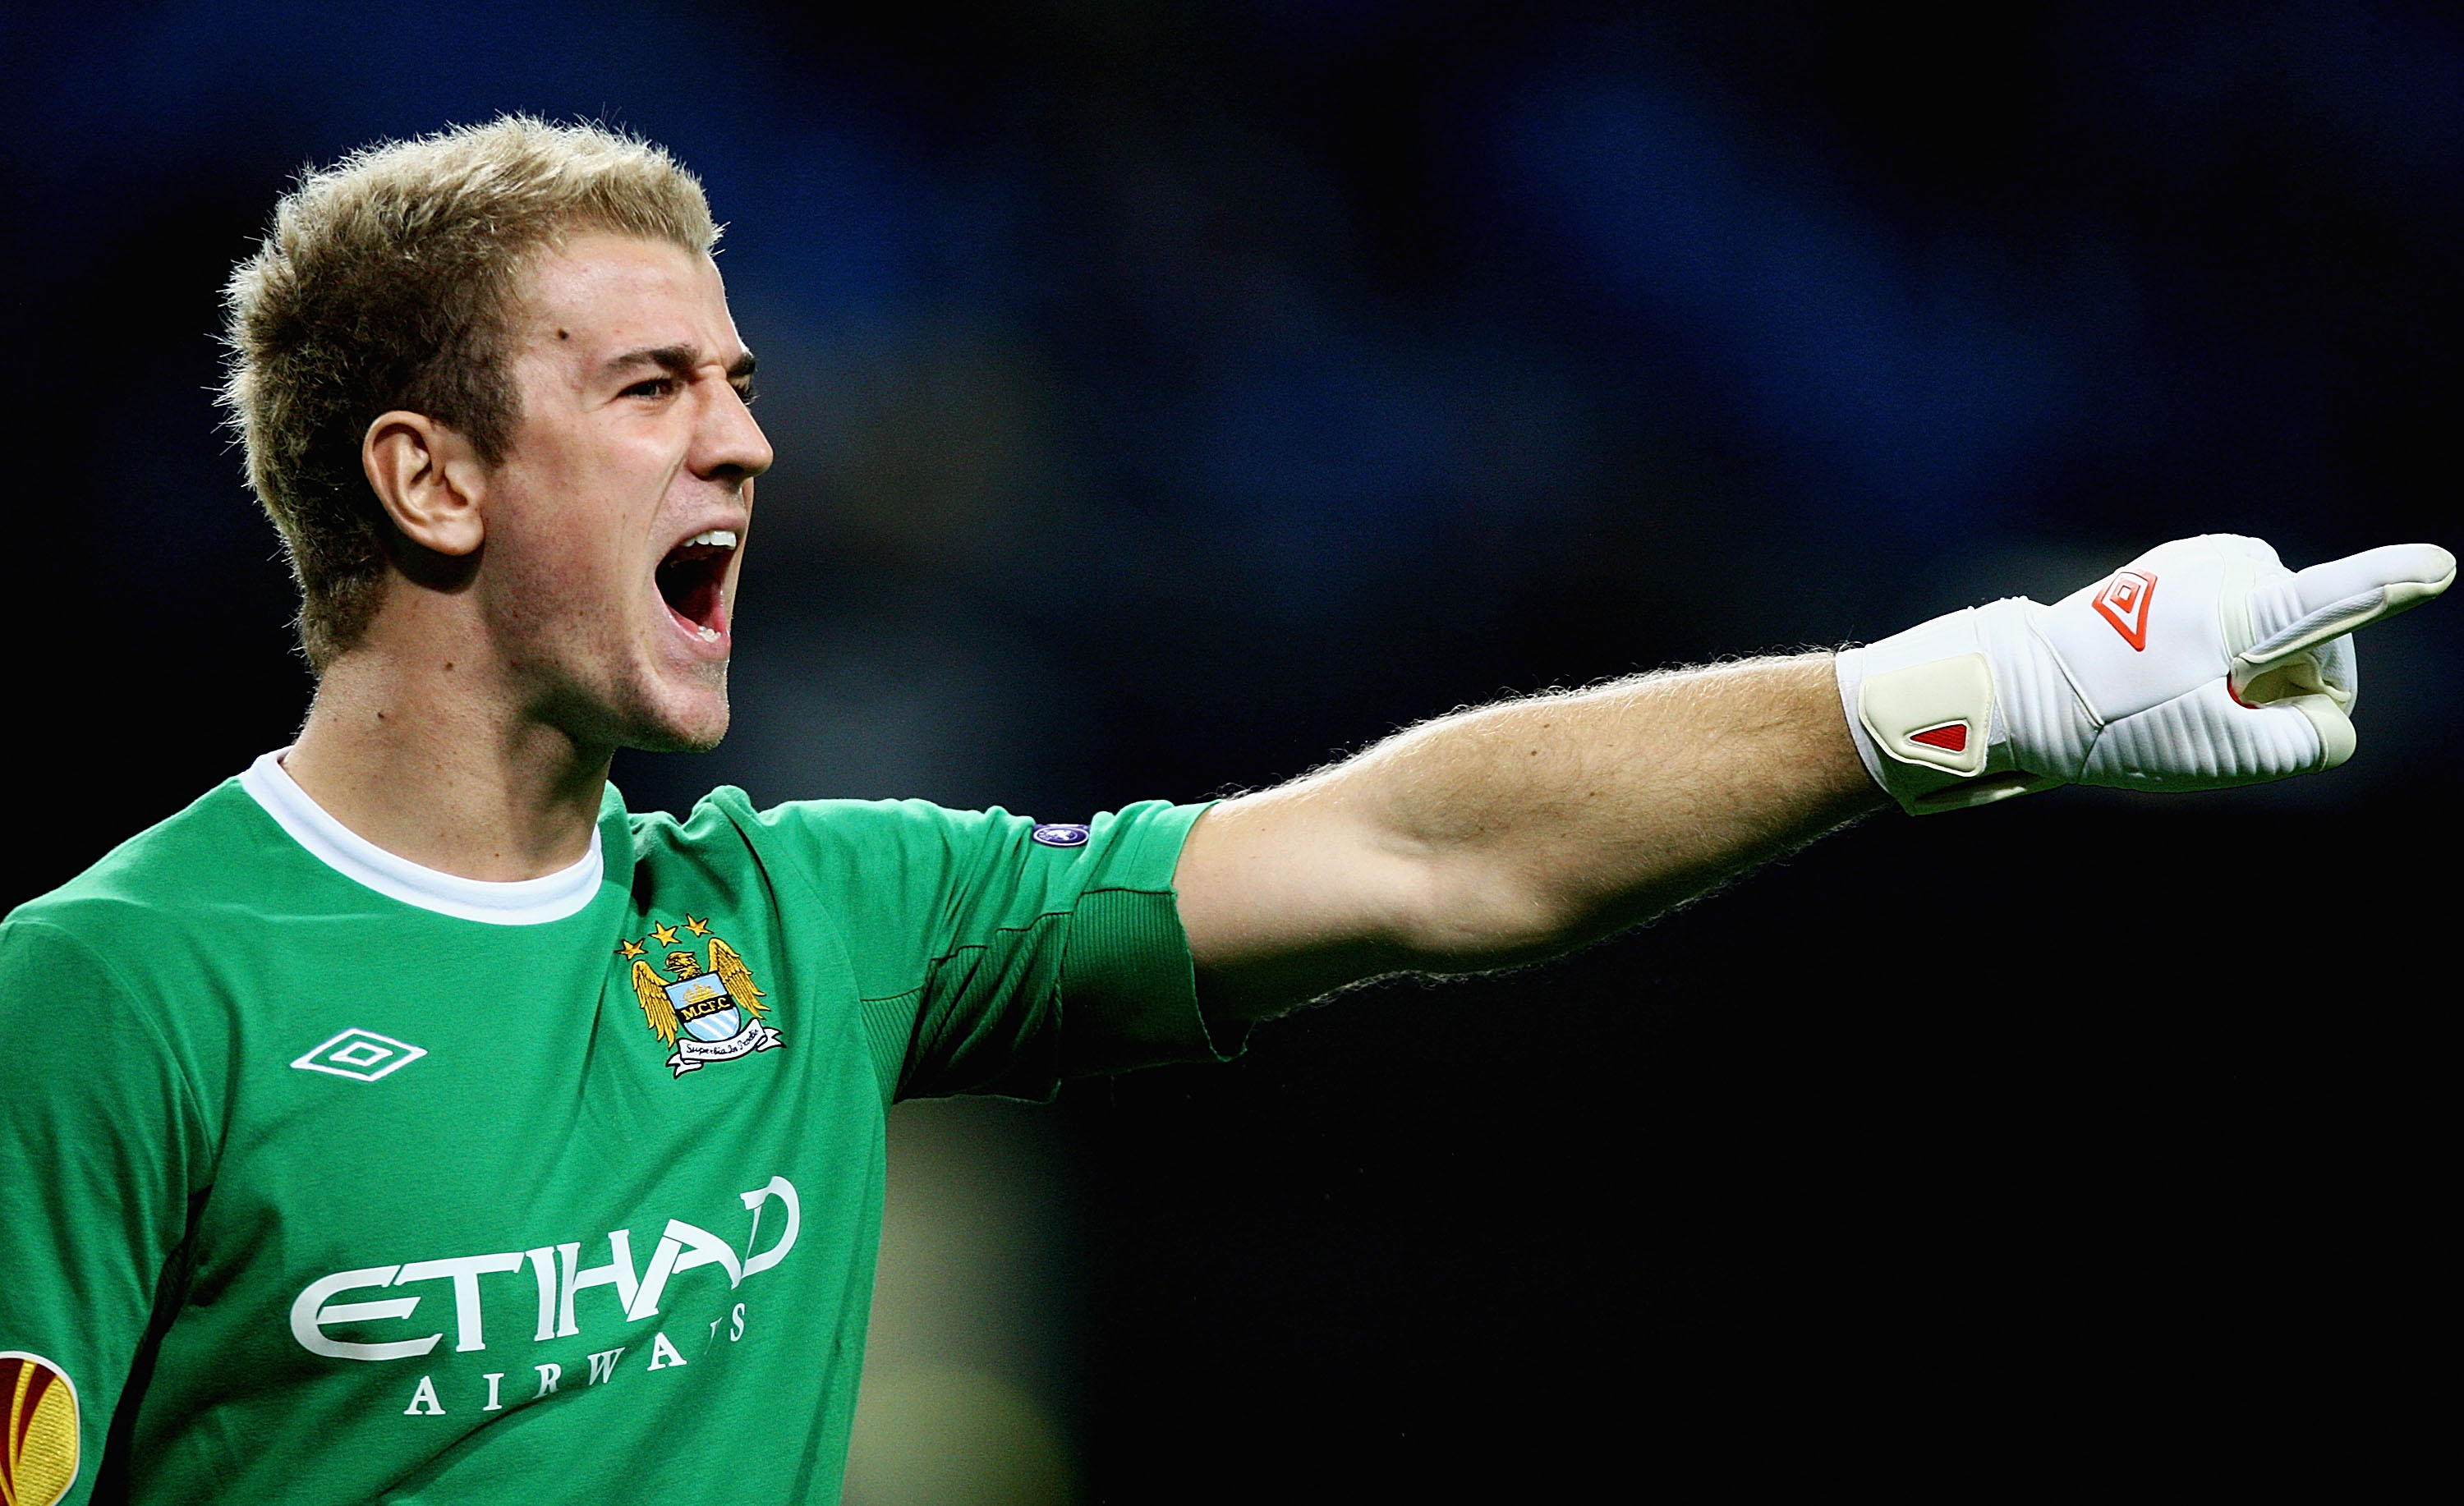 MANCHESTER, ENGLAND - SEPTEMBER 30:  Joe Hart of Manchester City in action during the UEFA Europa League Group A match between Manchester City and Juventus FC at City of Manchester Stadium on September 30, 2010 in Manchester, England.  (Photo by Matthew L